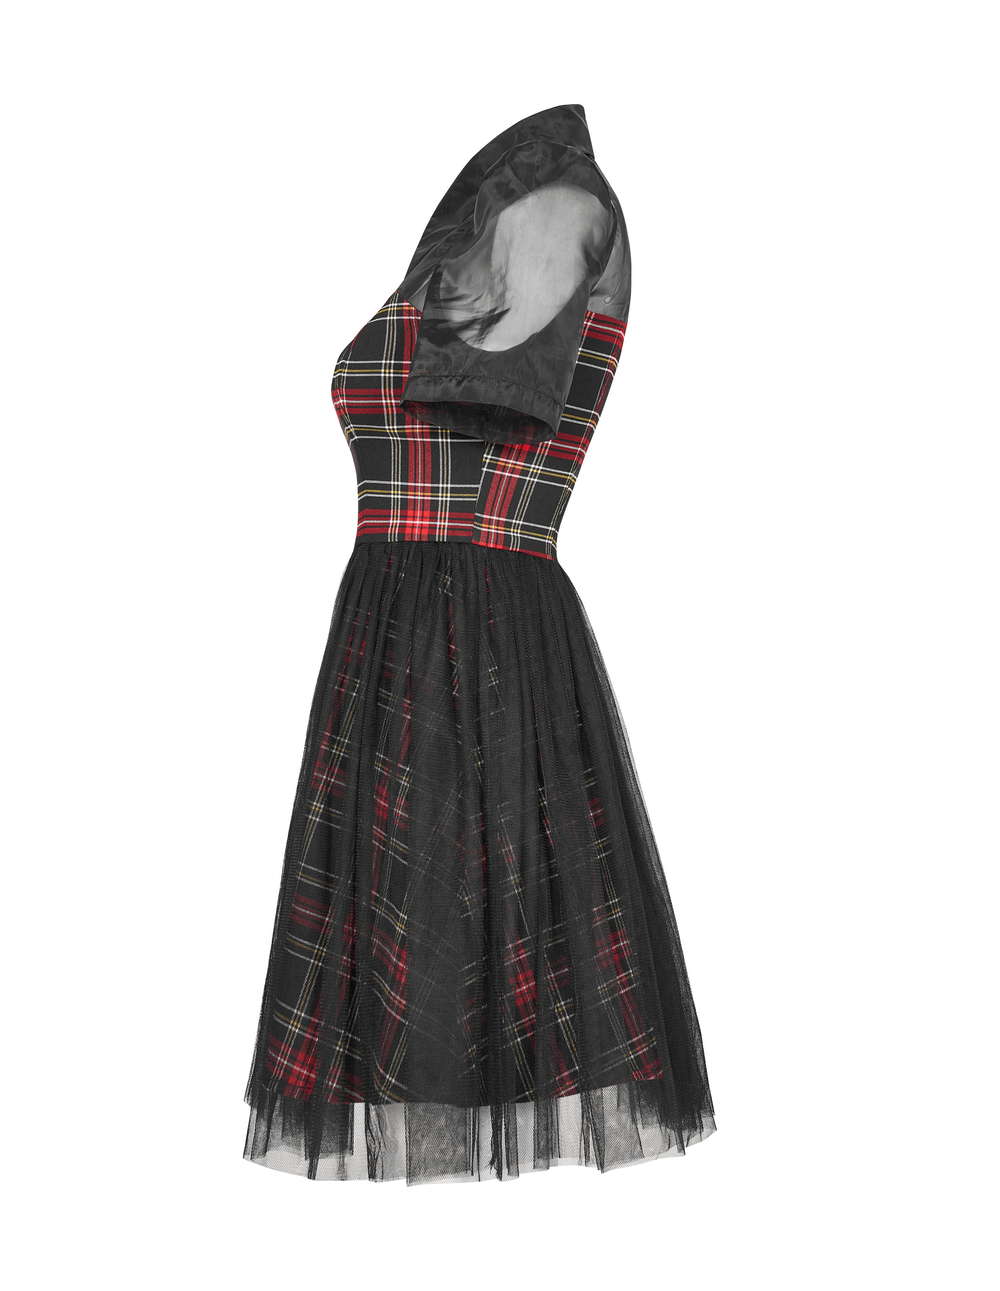 Gothic Punk Rave Plaid Dress with Heart Clasp Detailing